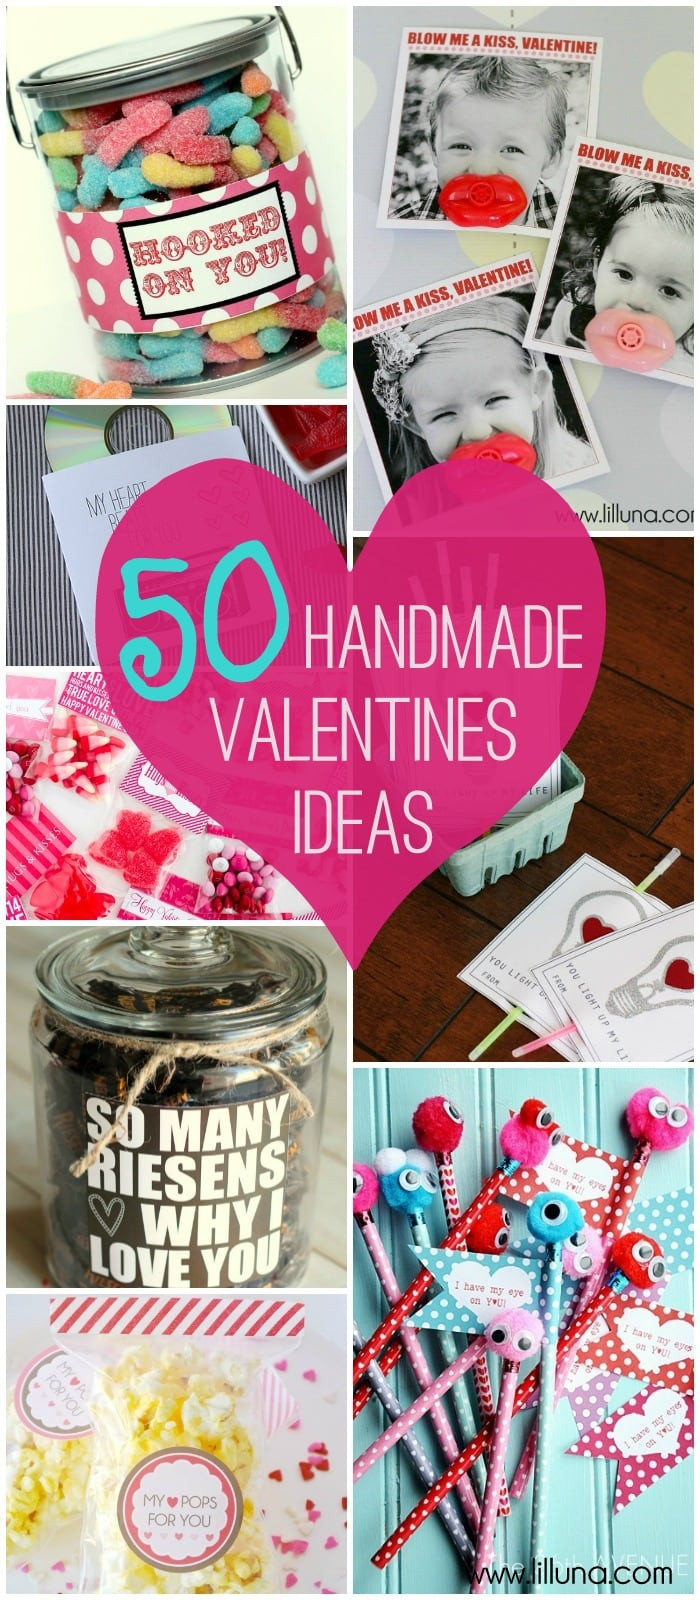 Top Gift Ideas For Valentines Day
 14 Gifts of Valentines with Free Printables plus MORE